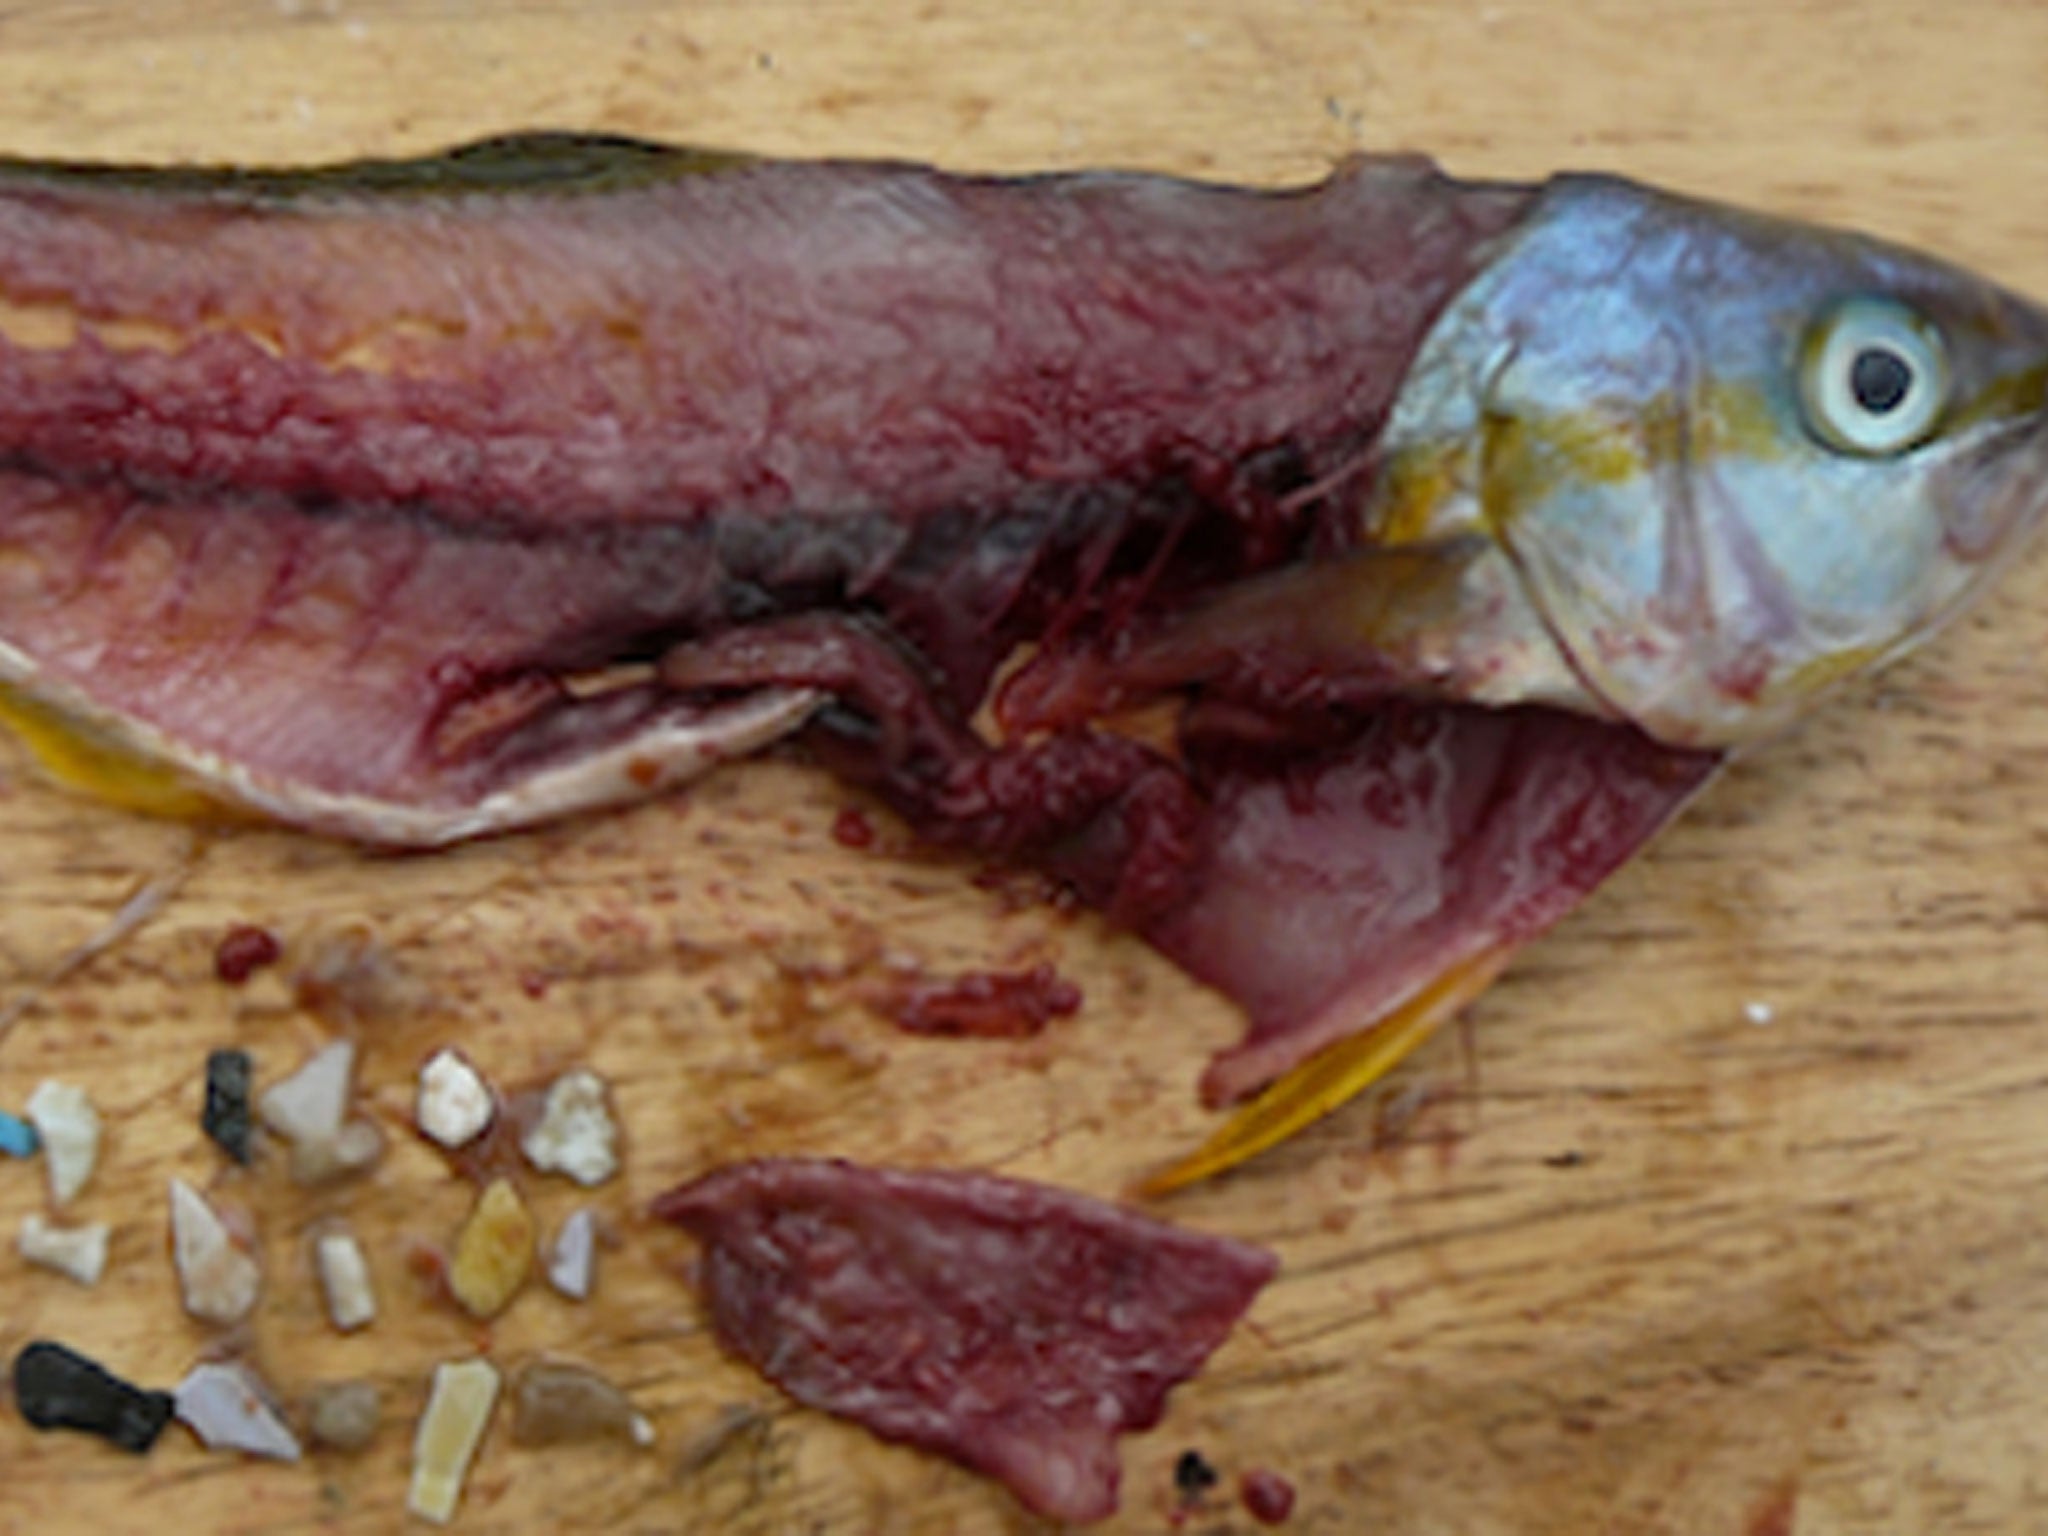 Sources of microplastic pollution found in this dissected fish